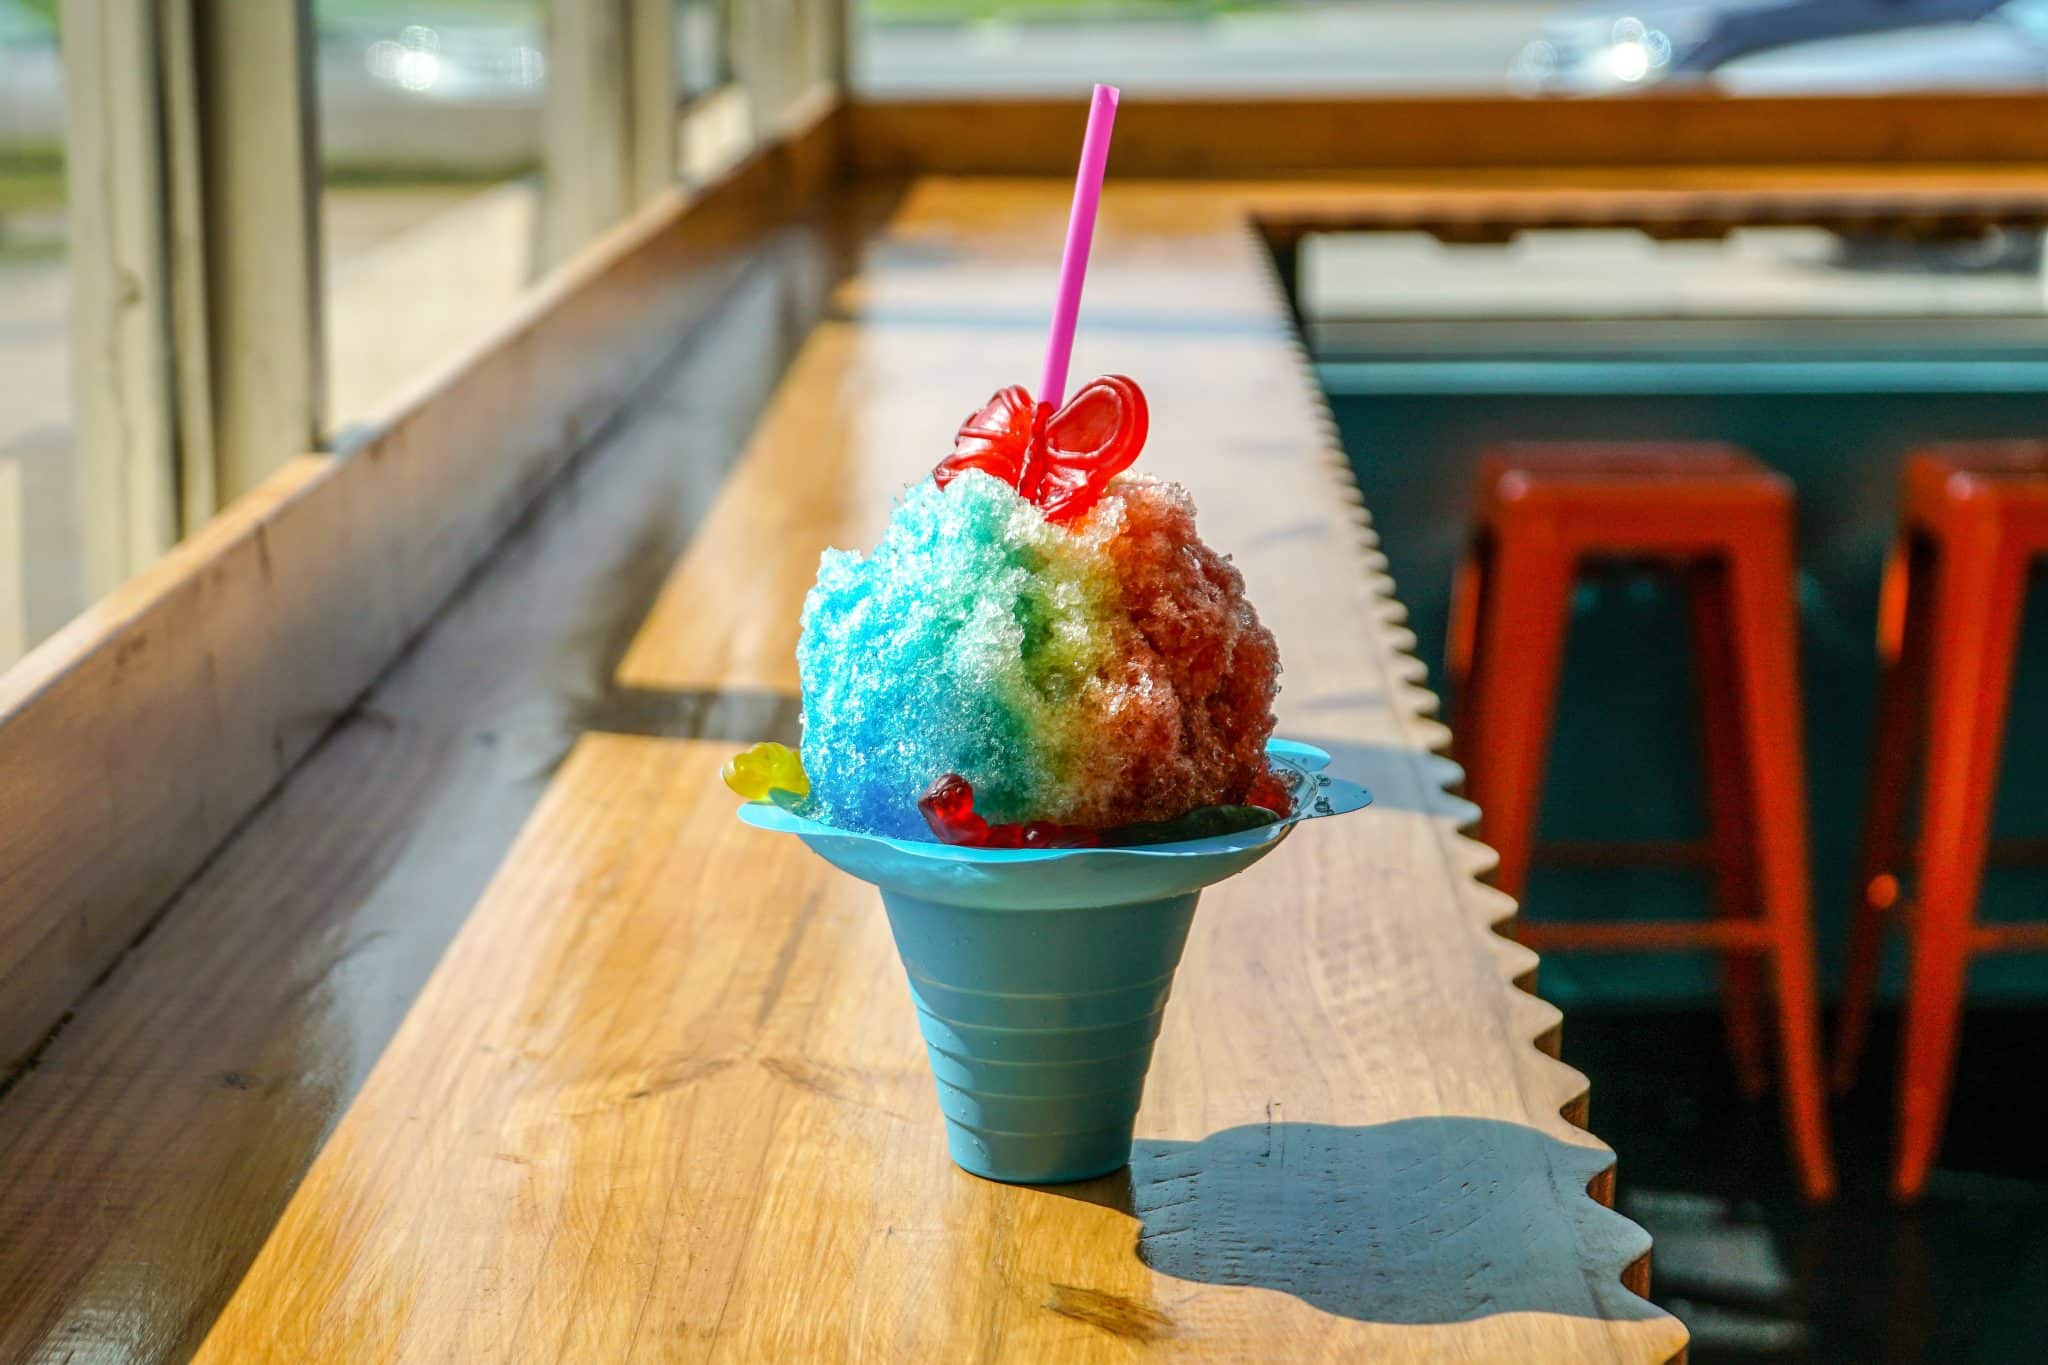 Shaved ice photo by thomas park for unsplash(1).jpg